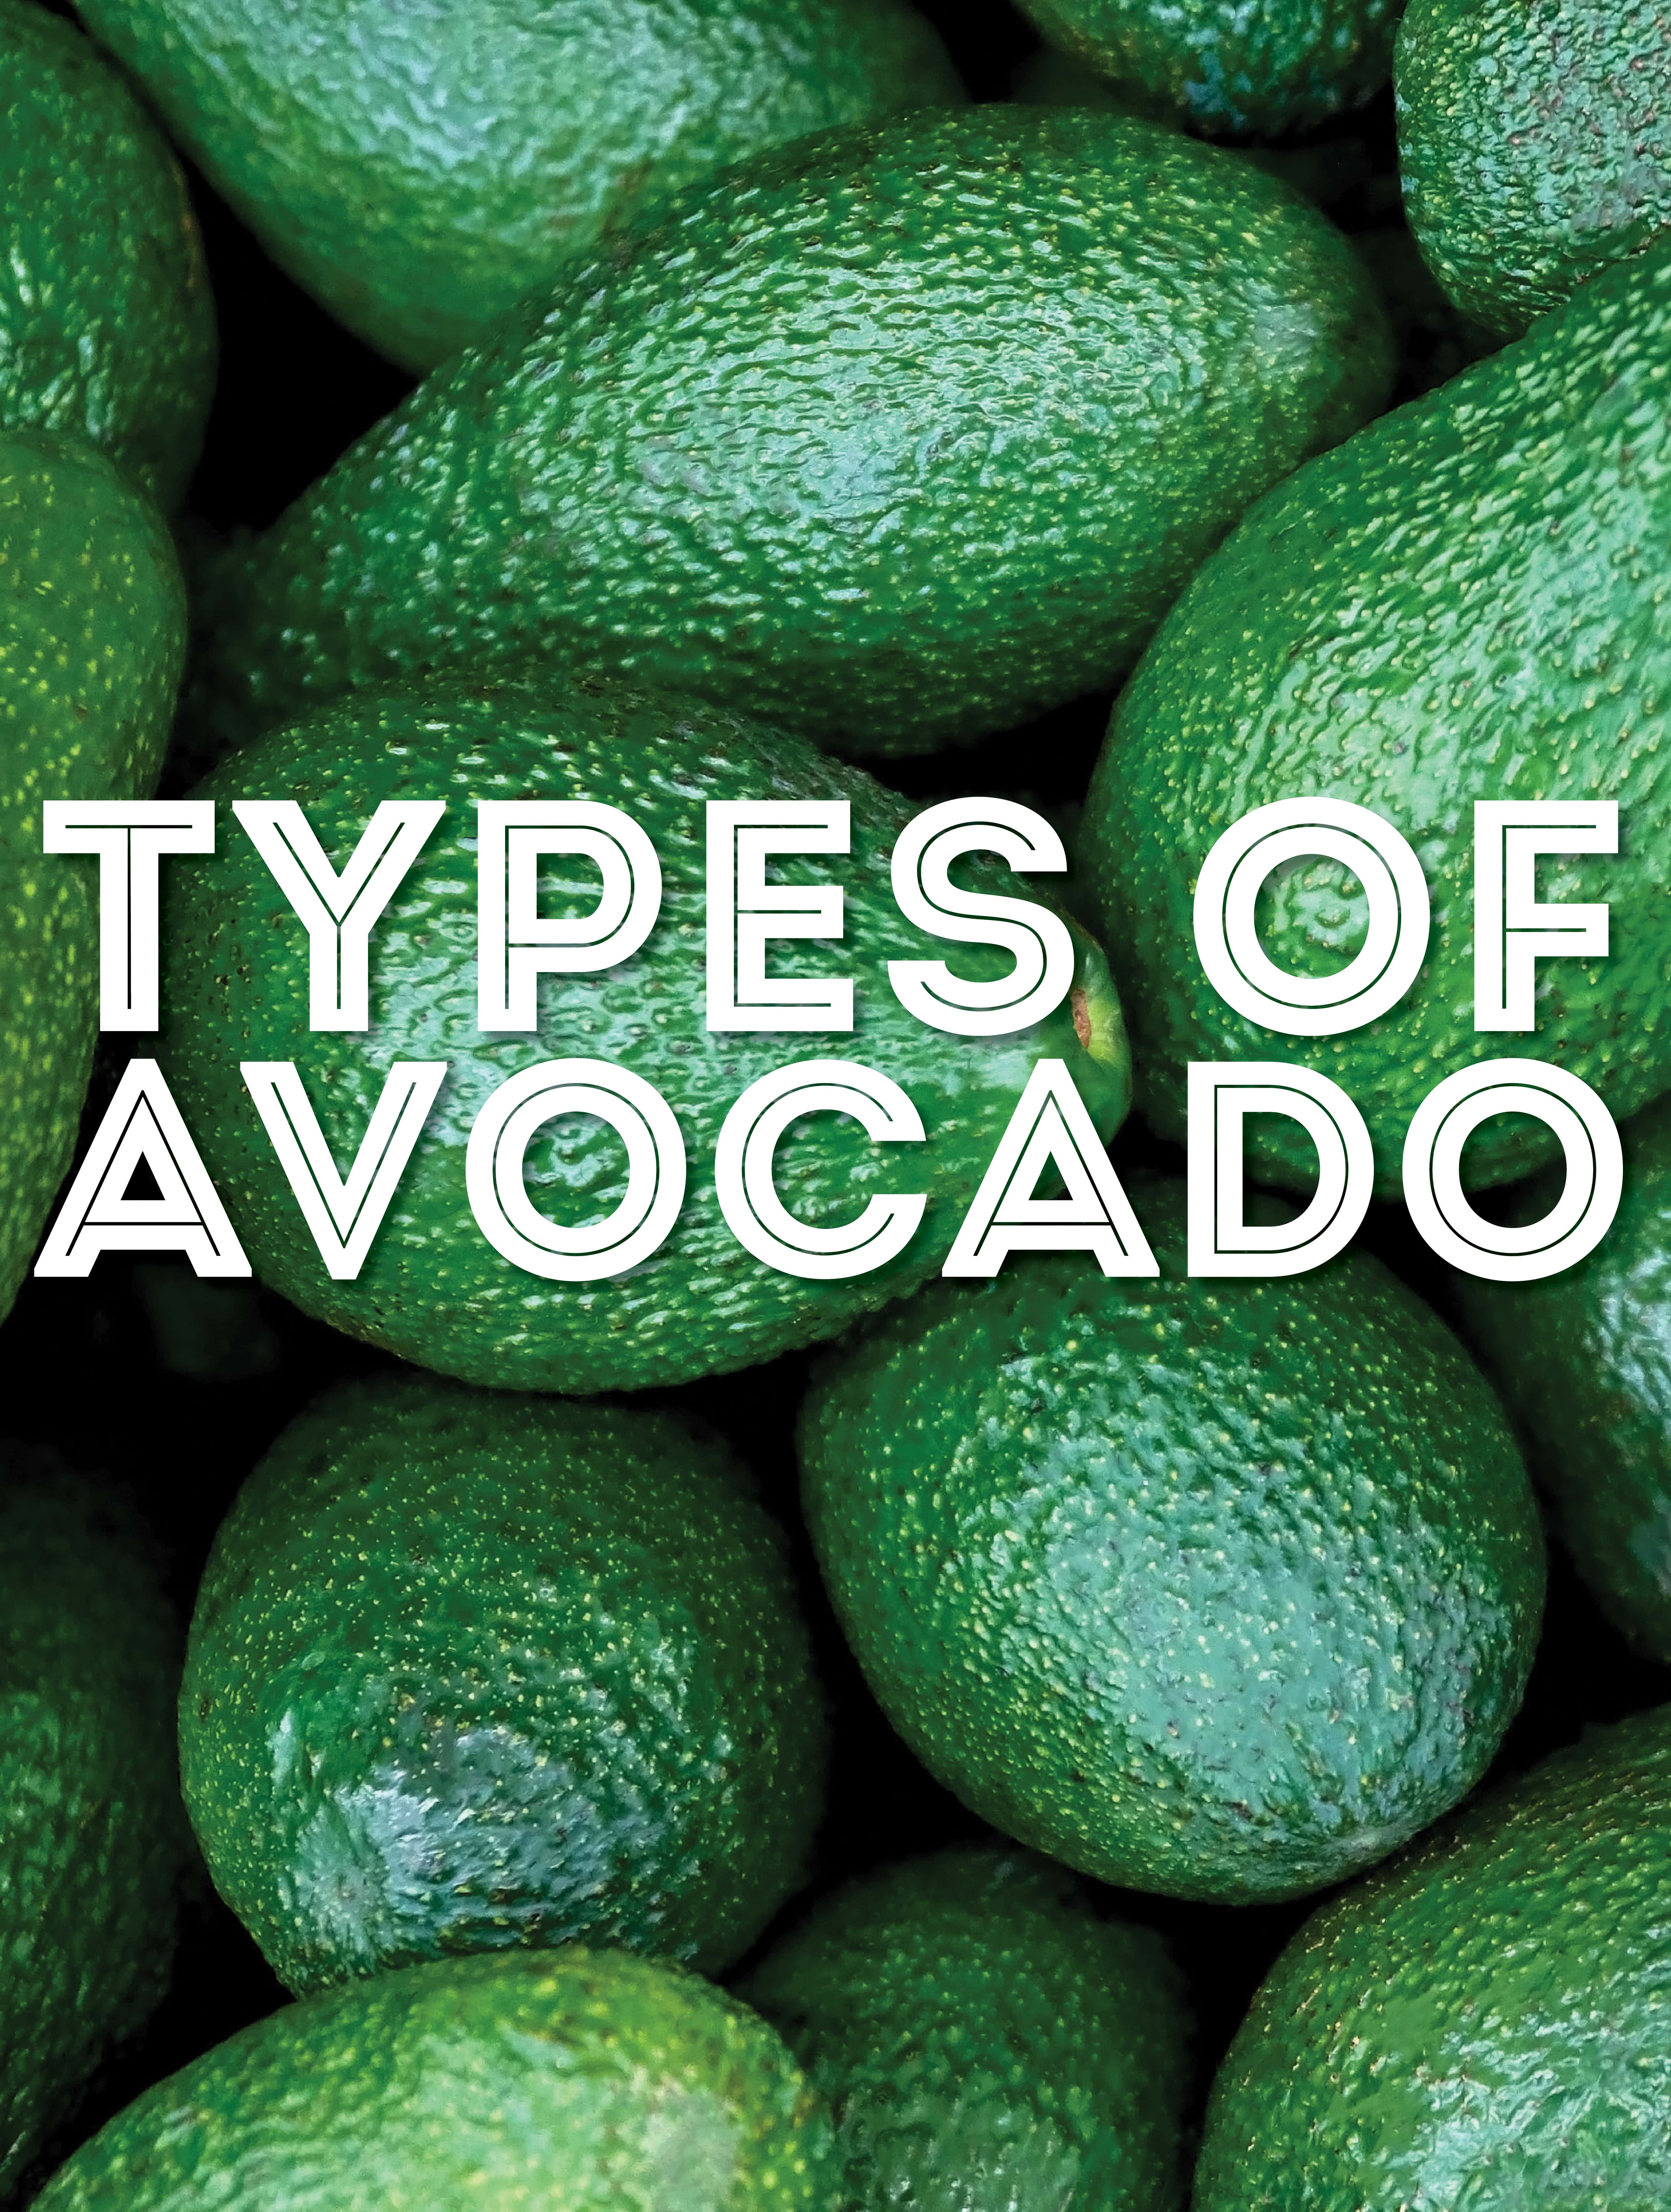 Collage that says "types of avocado".